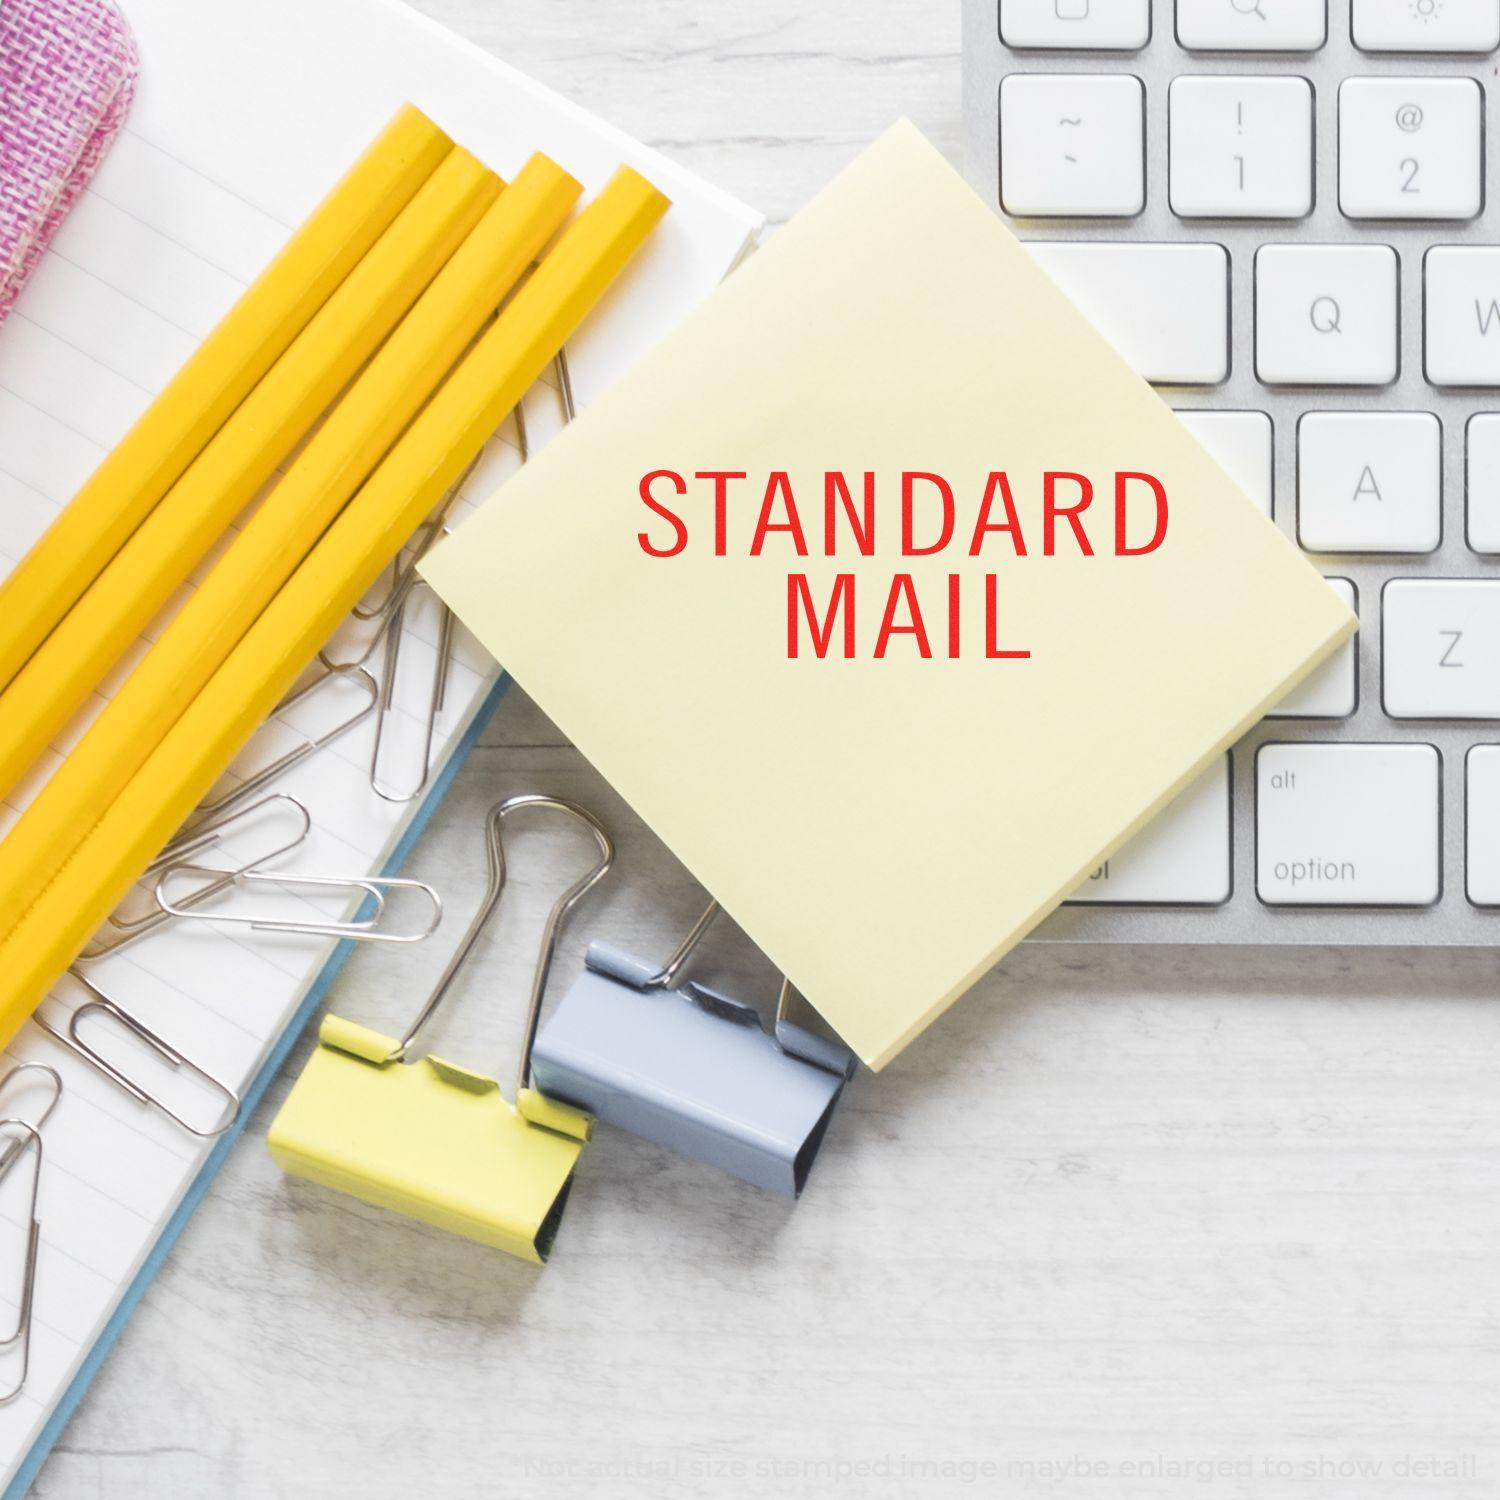 A self-inking stamp with a stamped image showing how the text "STANDARD MAIL" in a stacked concept (takes up two lines) is displayed after stamping.